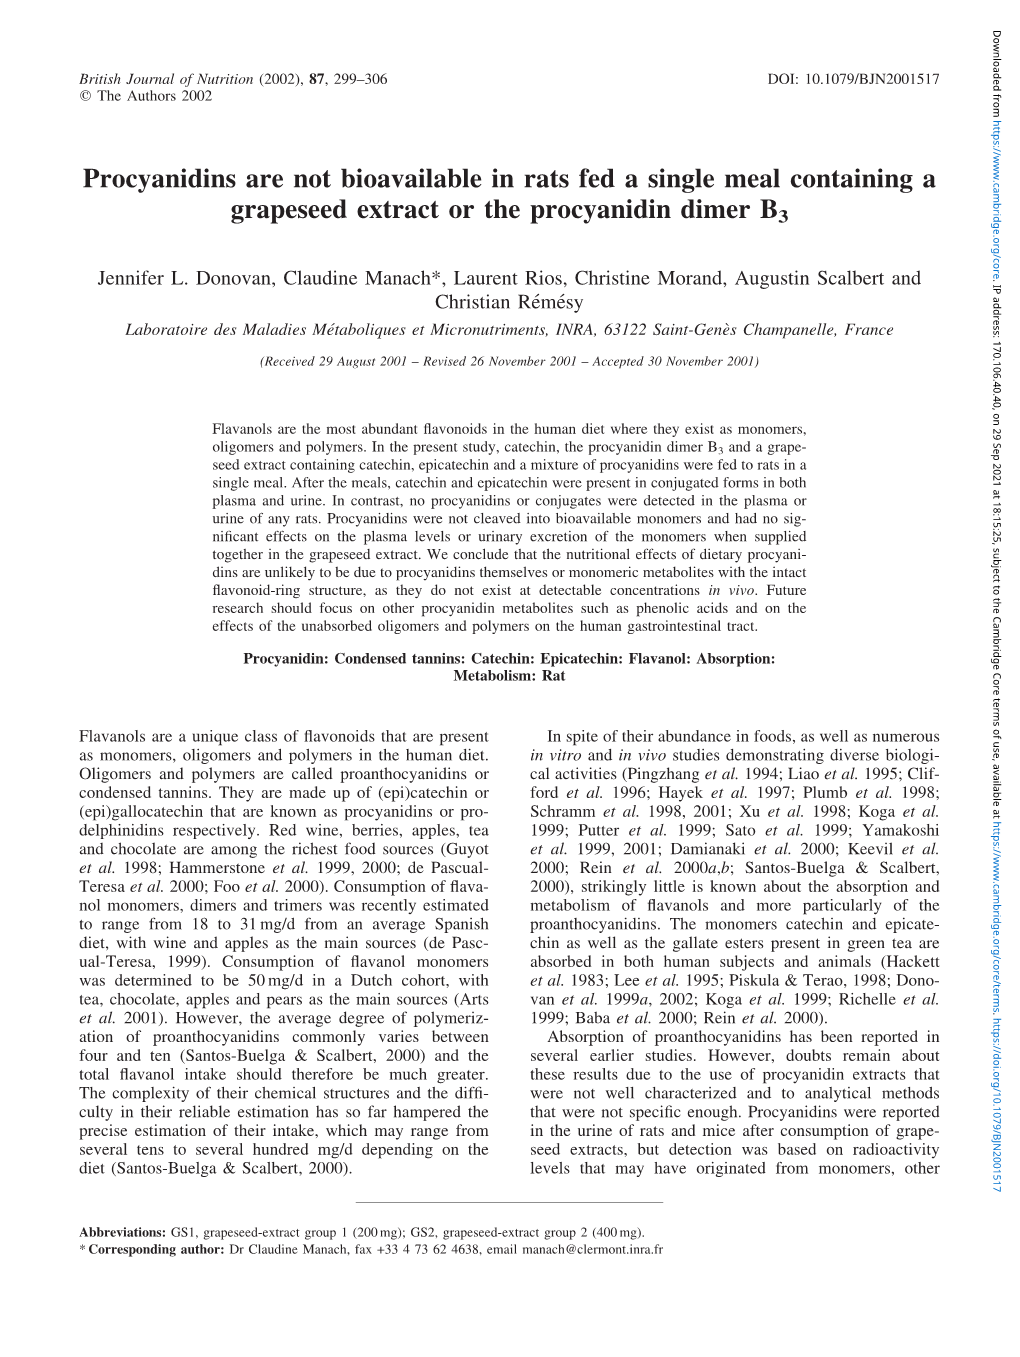 Procyanidins Are Not Bioavailable in Rats Fed a Single Meal Containing a Grapeseed Extract Or the Procyanidin Dimer B3